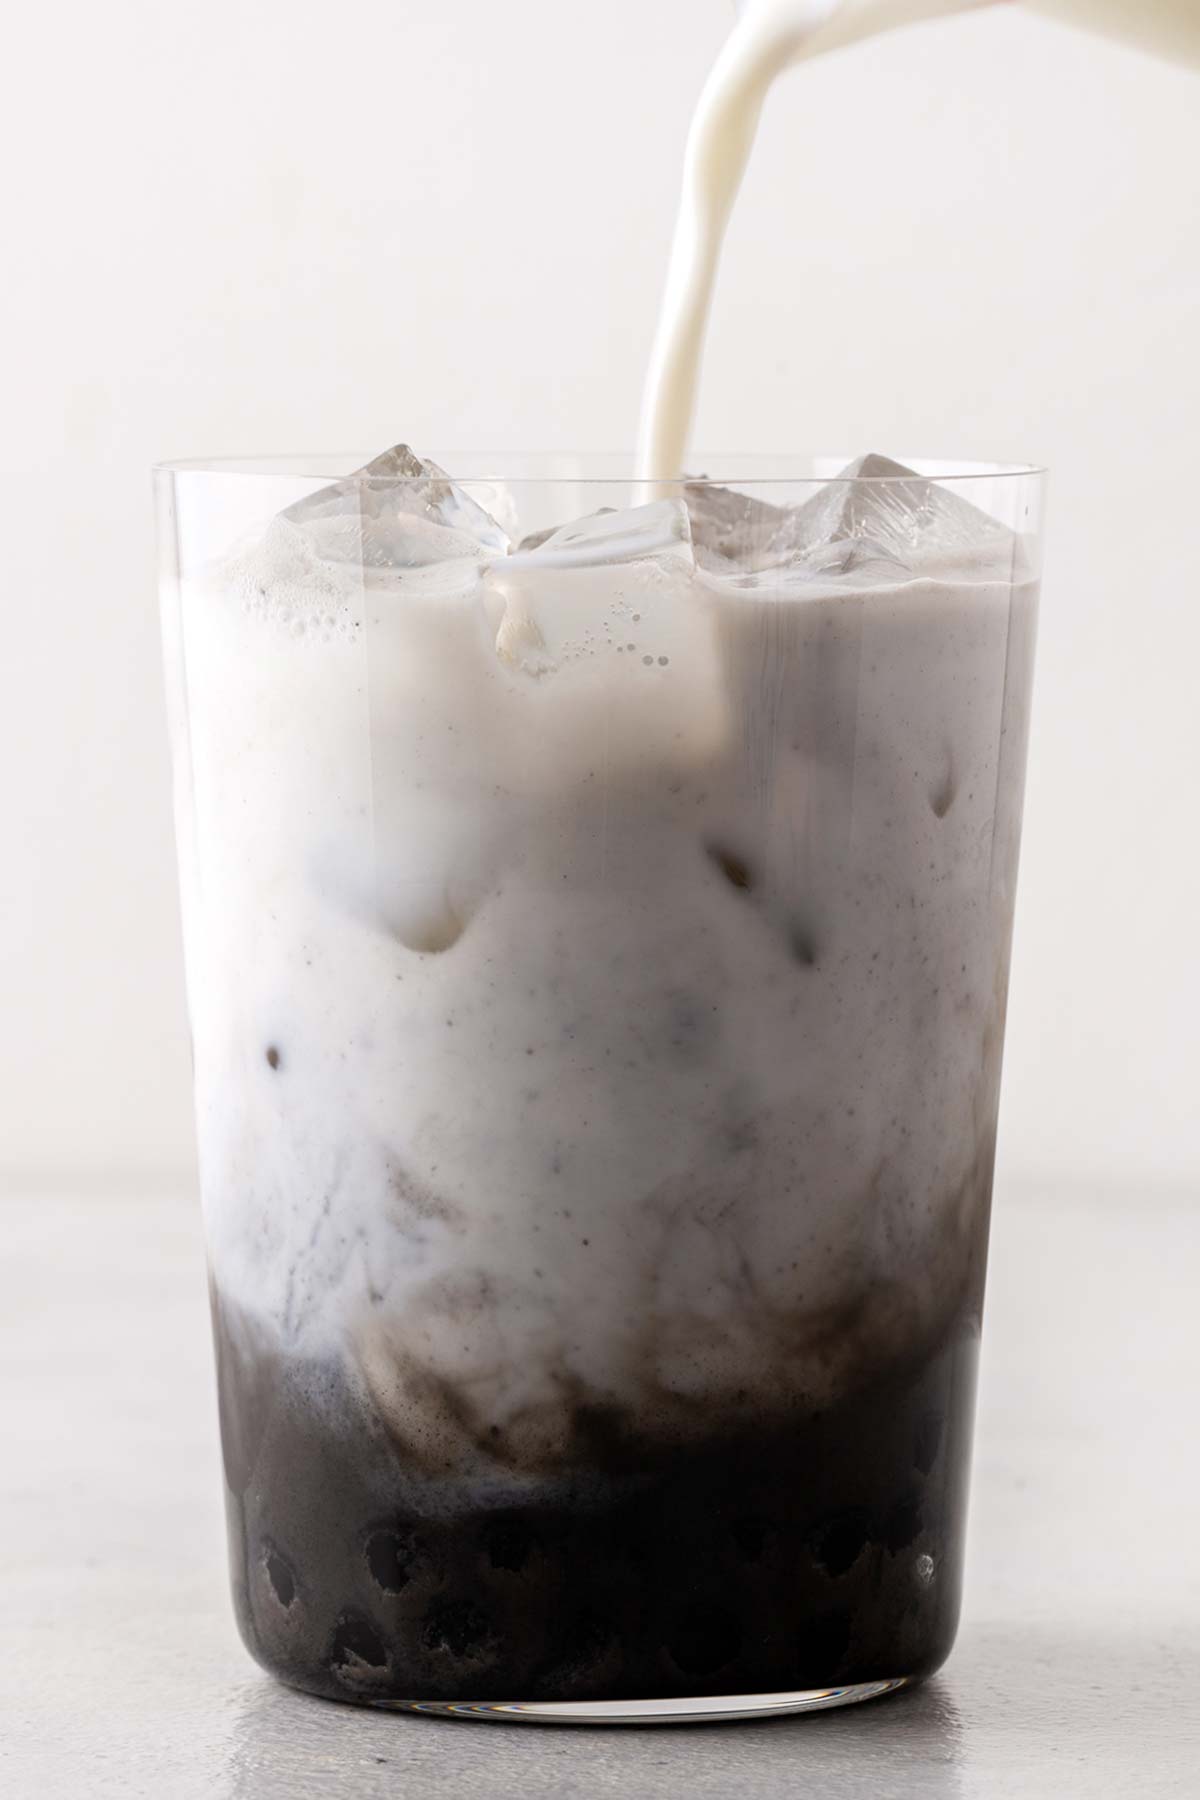 Milk being poured to make Black Sesame Bubble Tea (Black Sesame Boba Milk Tea) in a clear glass with wide straw.